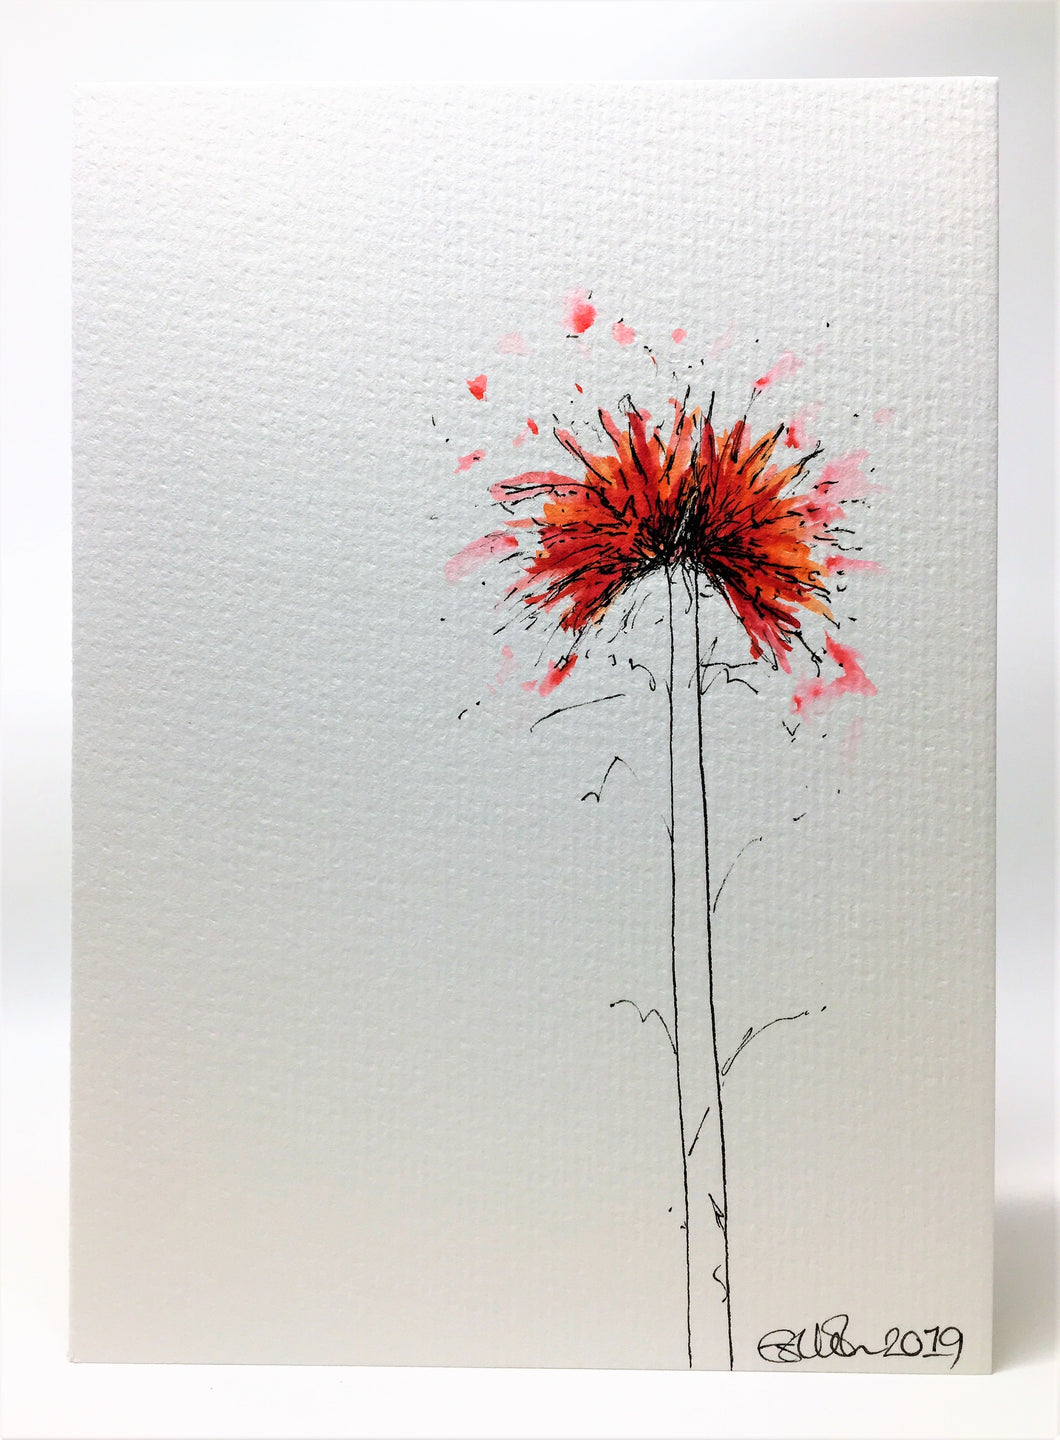 Handpainted Watercolour Greeting Card - Small Abstract Red, Orange and Pink Spiky Flowers - eDgE dEsiGn London